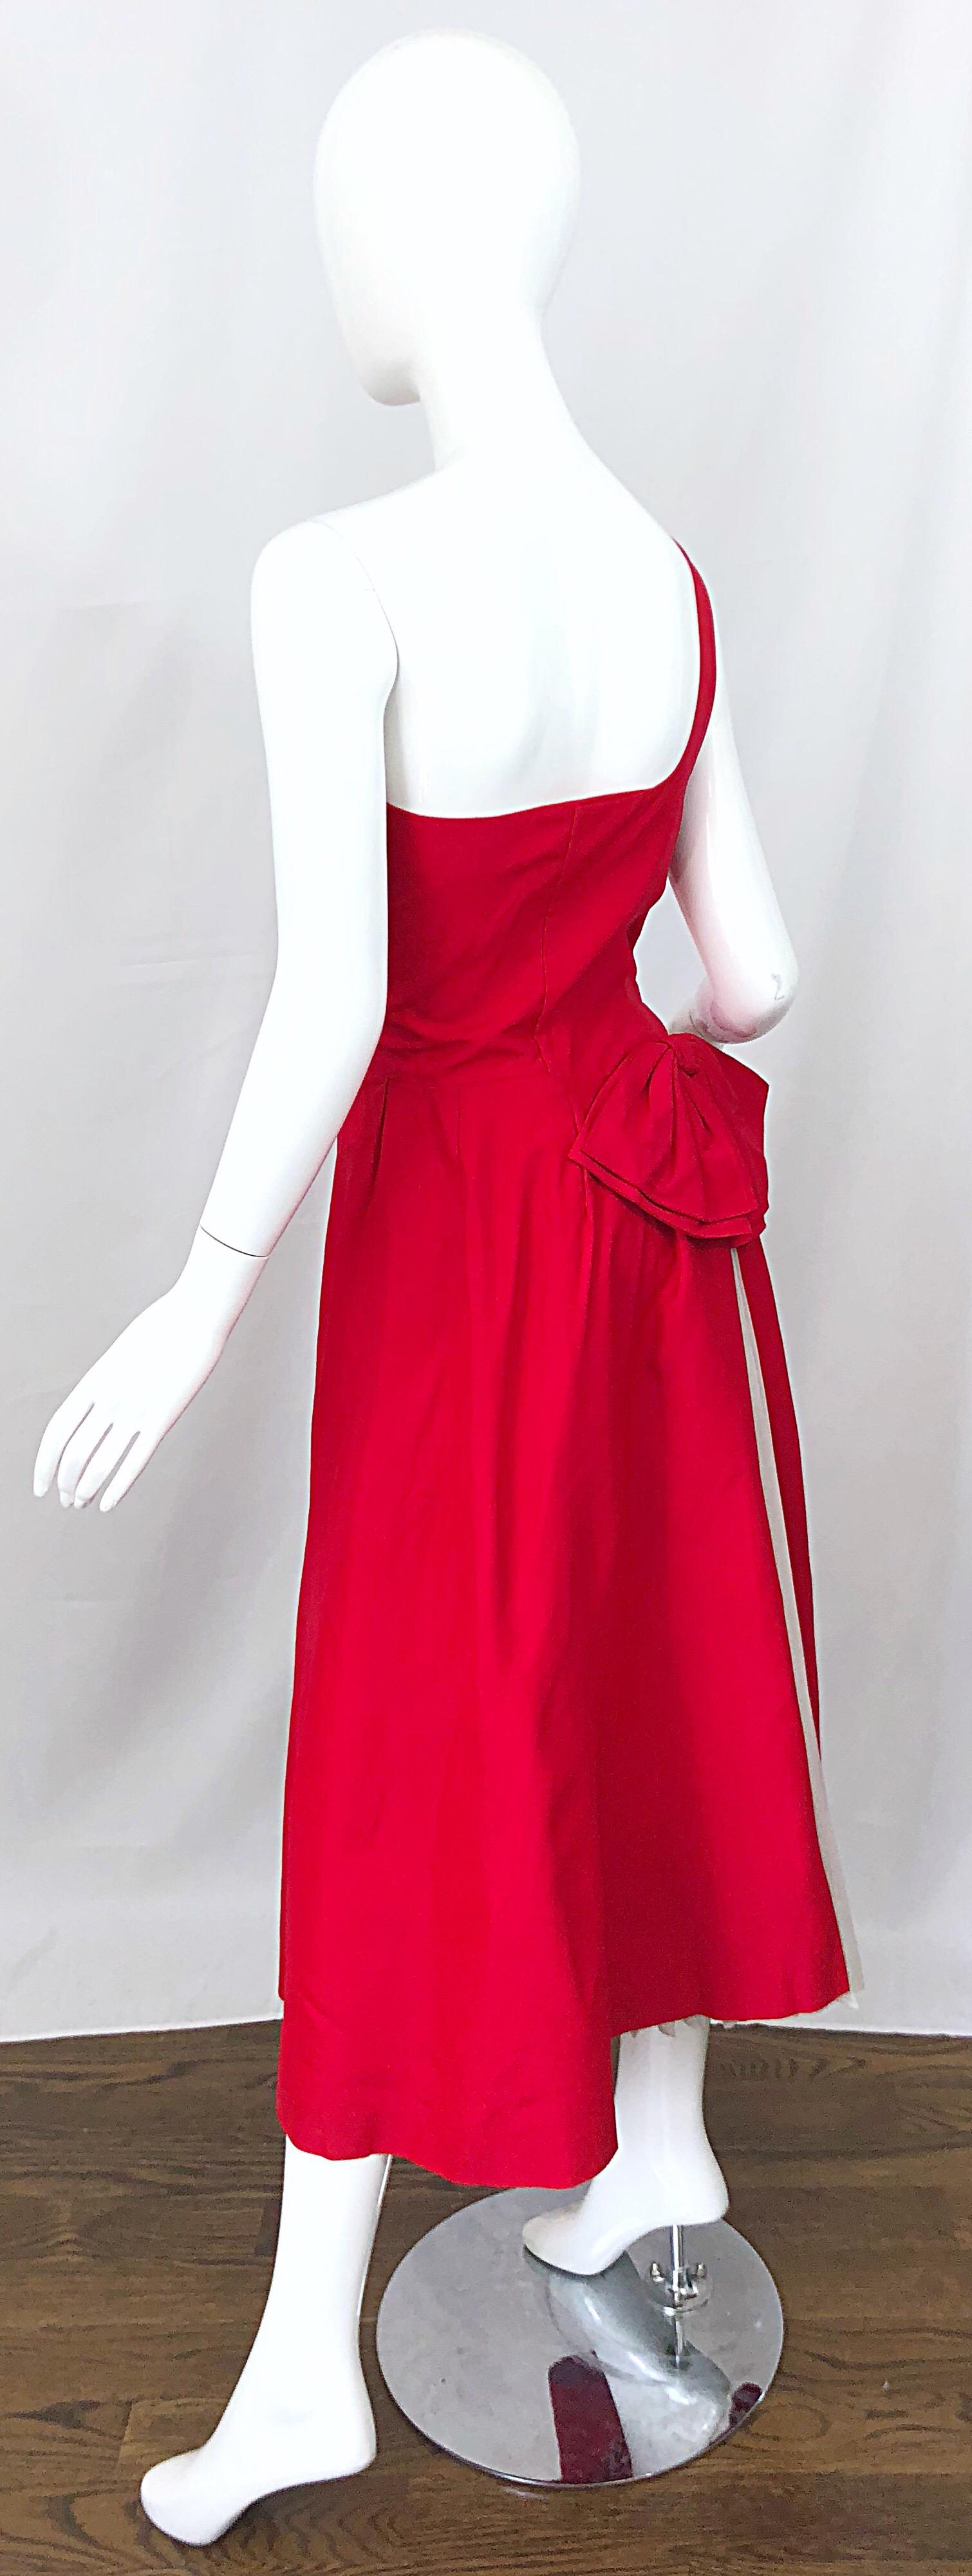 1950s Bess Myerson Lipstick Red + White One Shoulder Vintage 50s Silk Dress For Sale 1